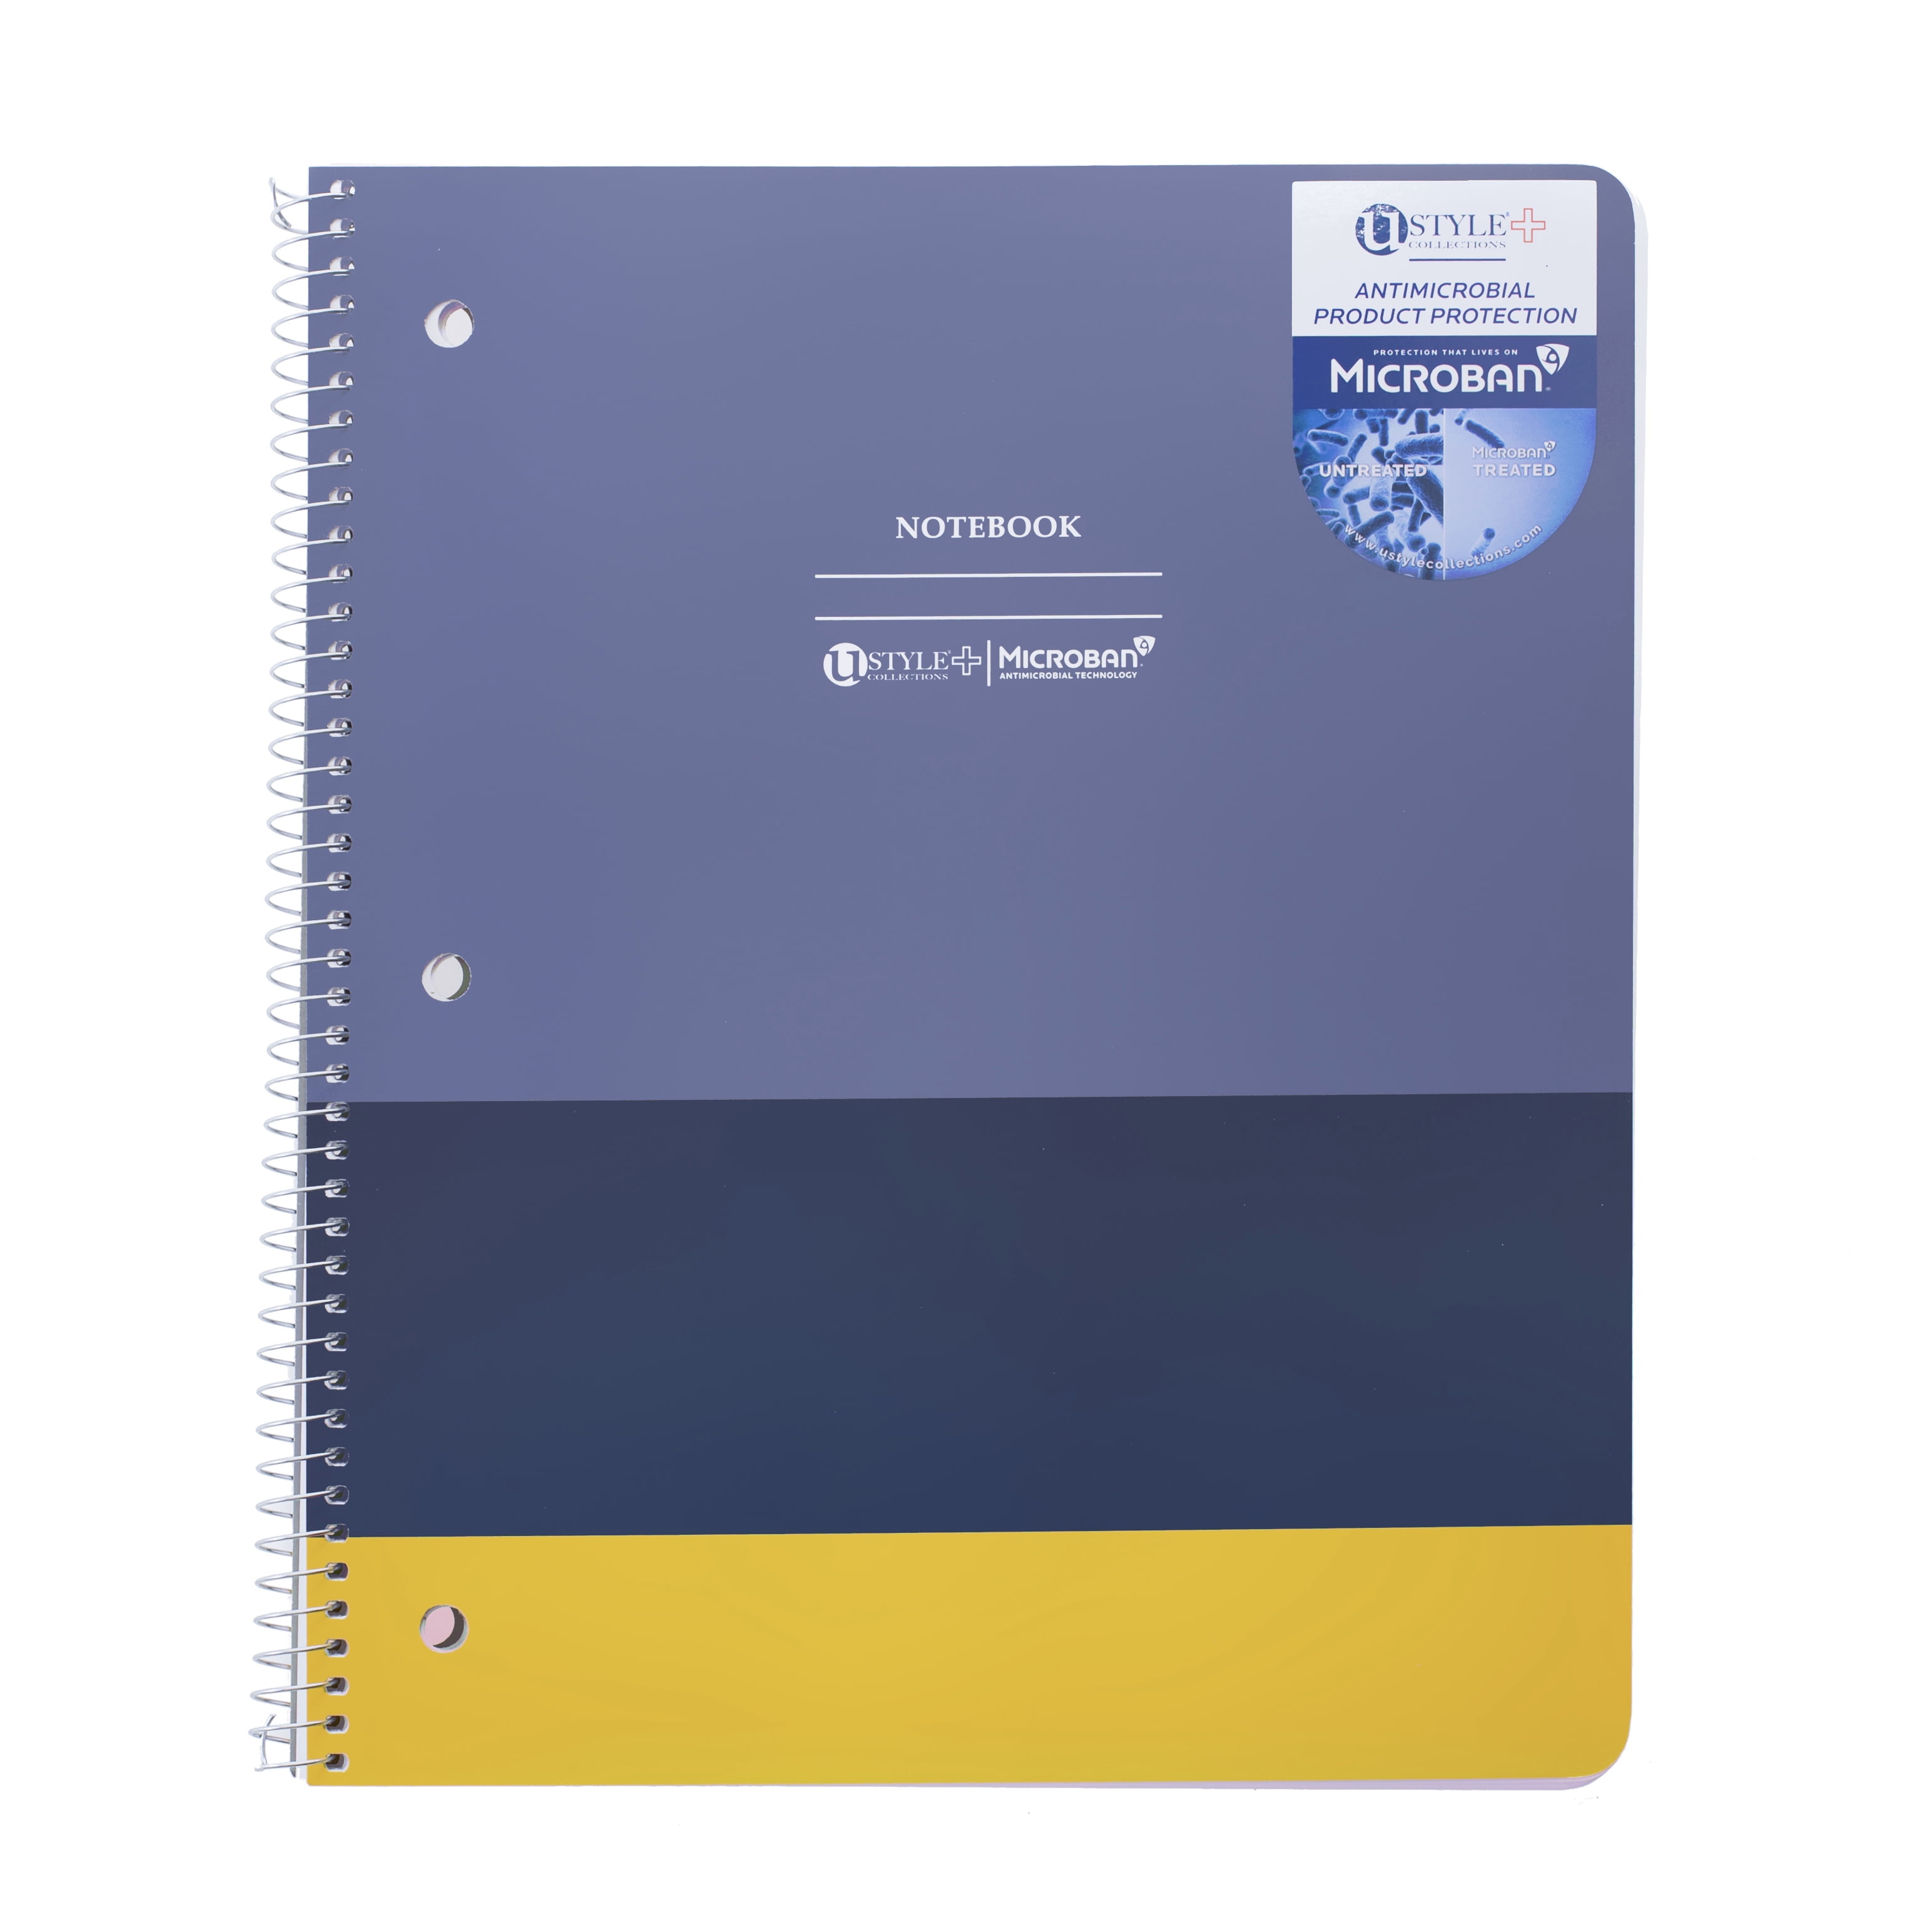 U Style Antimicrobial 1 Subject Notebook with Microban®, 80 Sheets, College  Ruled, 4 Pack, Fashion